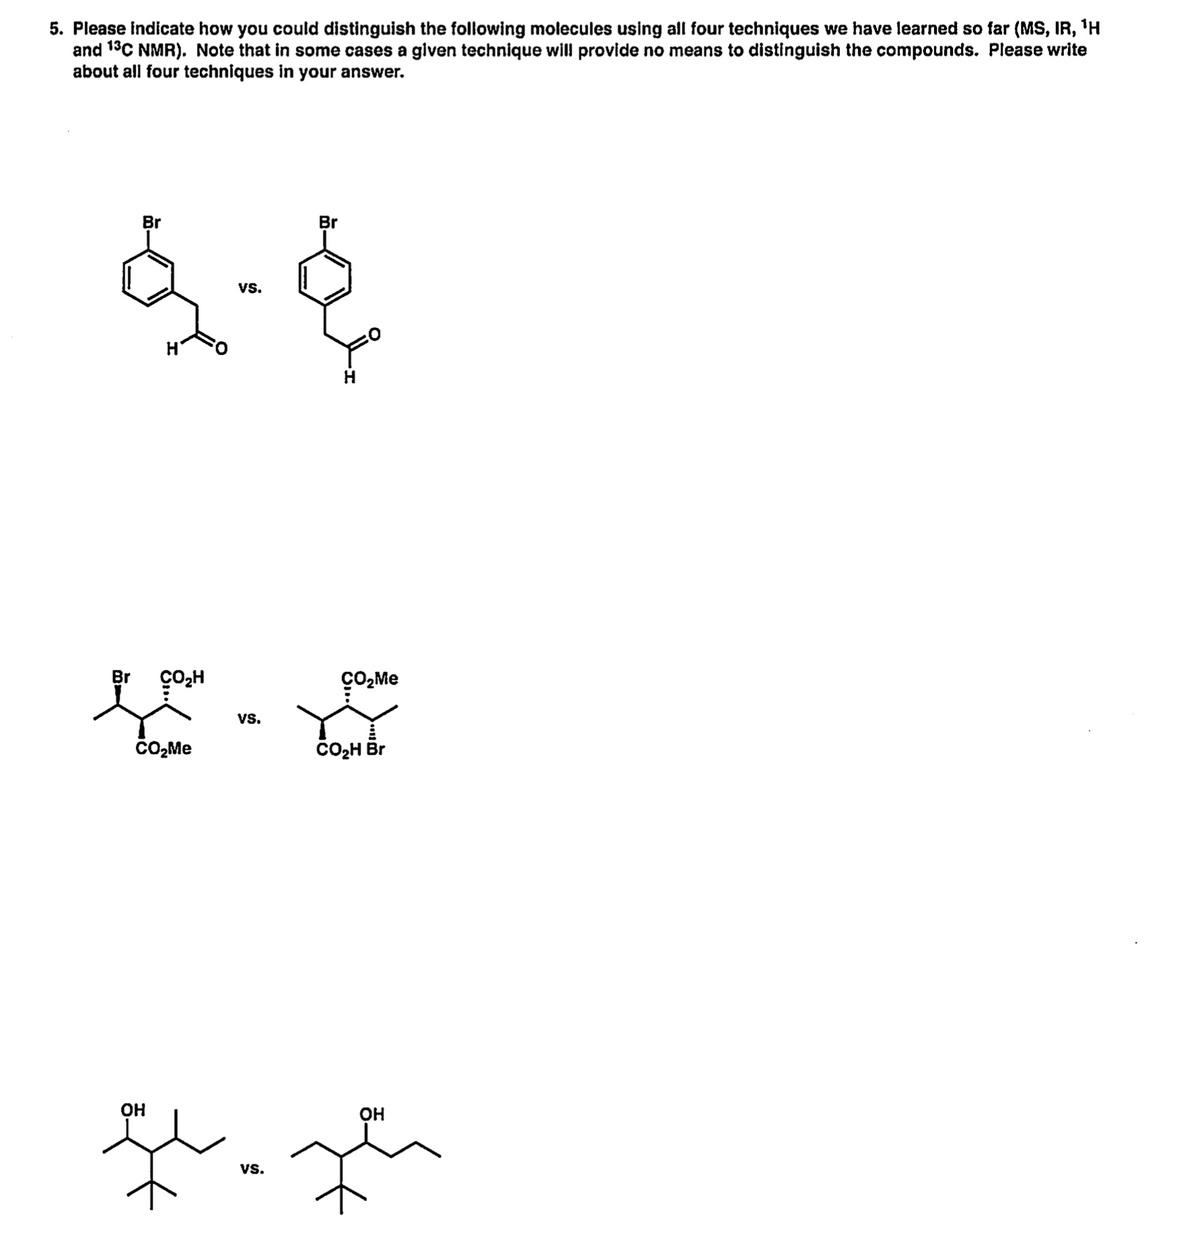 5. Please indicate how you could distinguish the following molecules using all four techniques we have learned so far (MS, IR, 'H
and 13C NMR). Note that in some cases a given technique will provide no means to distinguish the compounds. Please write
about all four techniques in your answer.
Br
Br
vs.
Br
CO,H
çO2Me
vs.
čO,Me
CO2H Br
OH
OH
vs.
